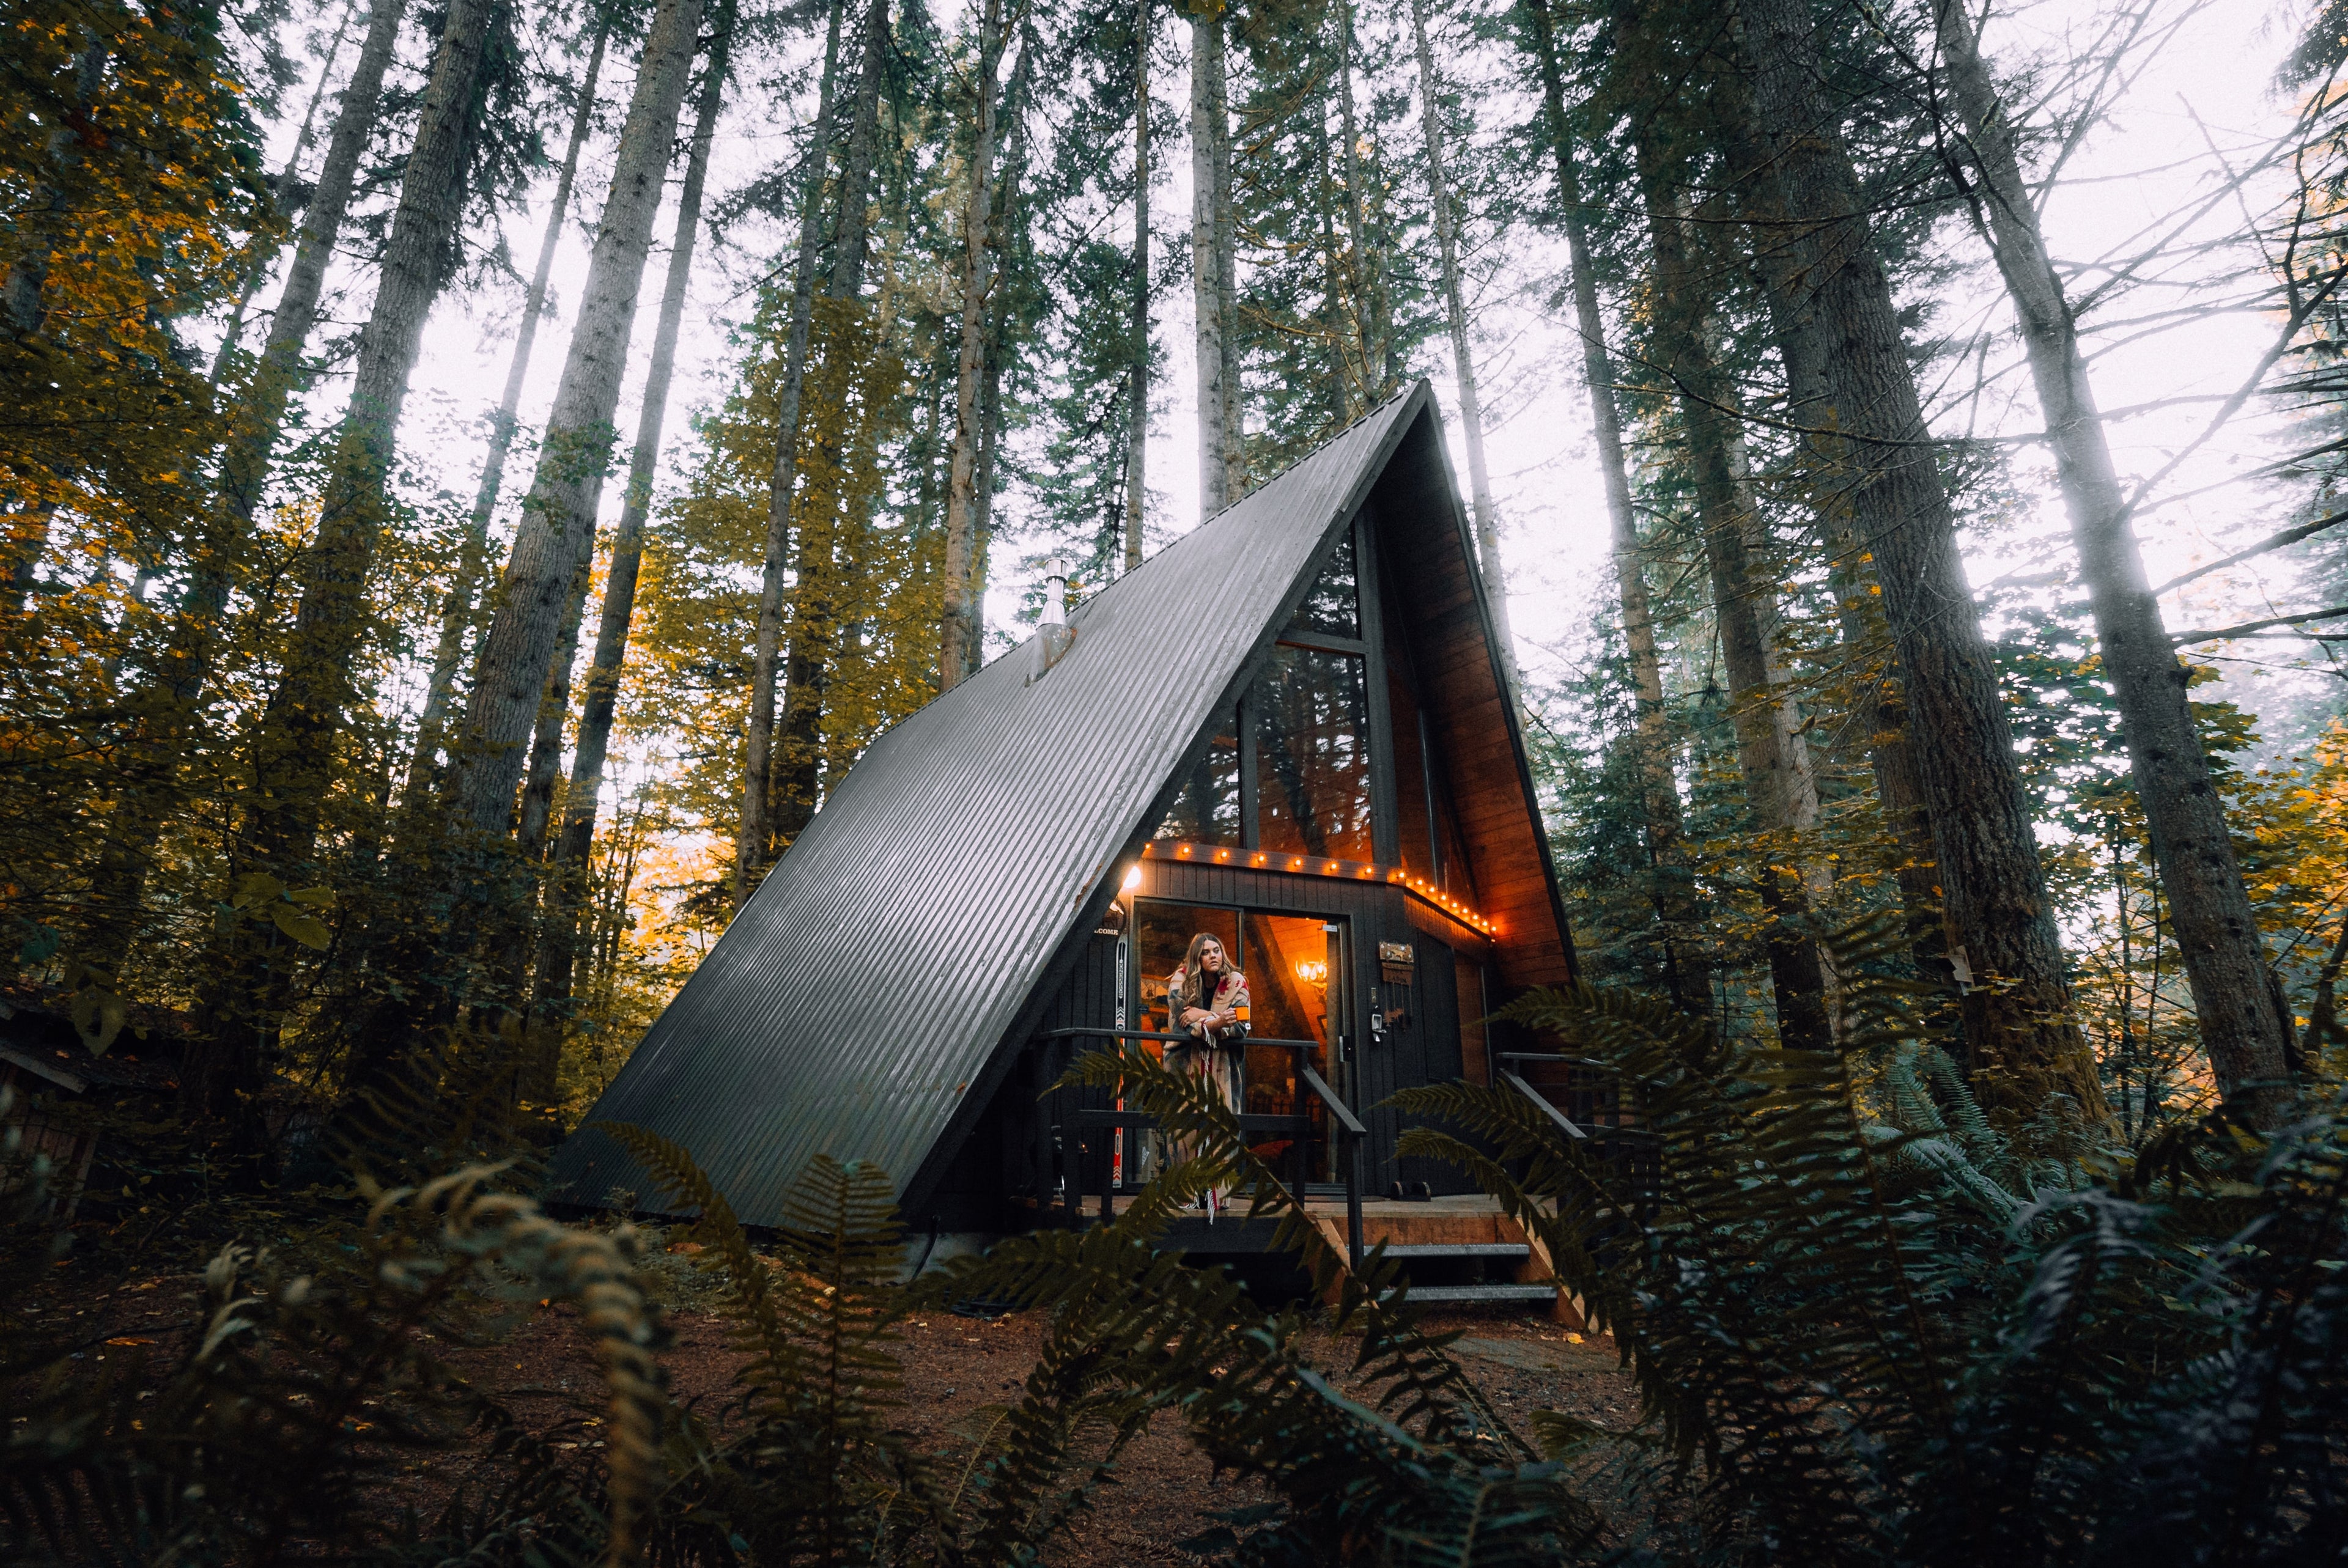  A cozy A-frame cabin nestled in a dense autumnal forest with warm lights illuminating the interior and a person standing on the front porch. Tall trees with yellowing leaves surround the cabin, evoking a serene, rustic retreat.